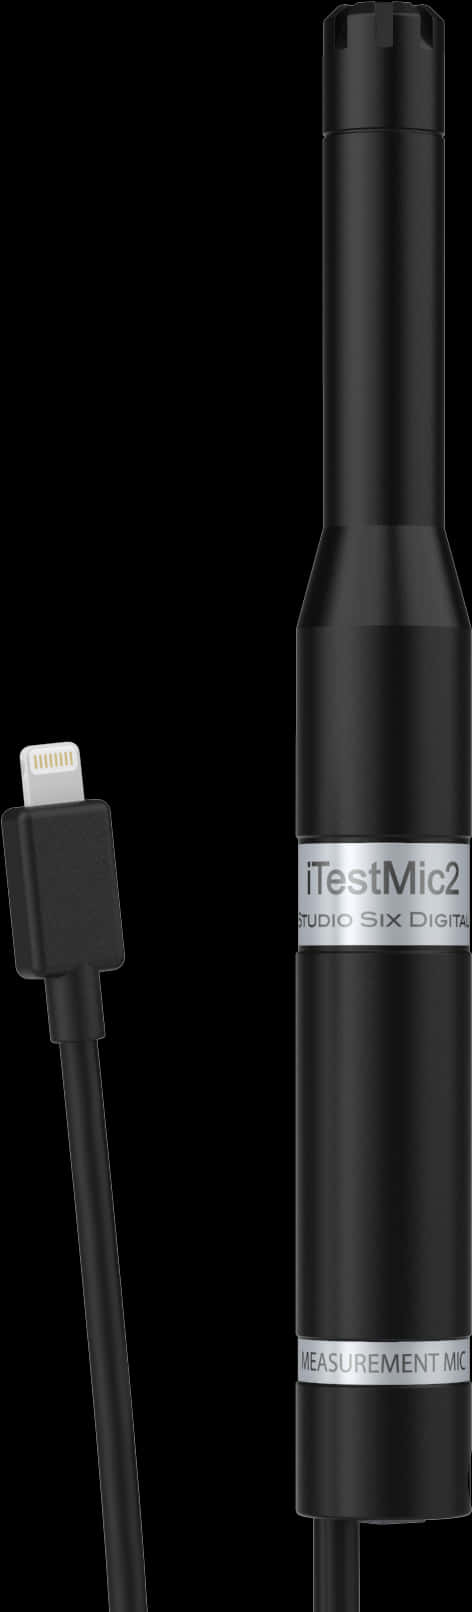 I Test Mic2 Measurement Microphonewith Lightning Connector PNG